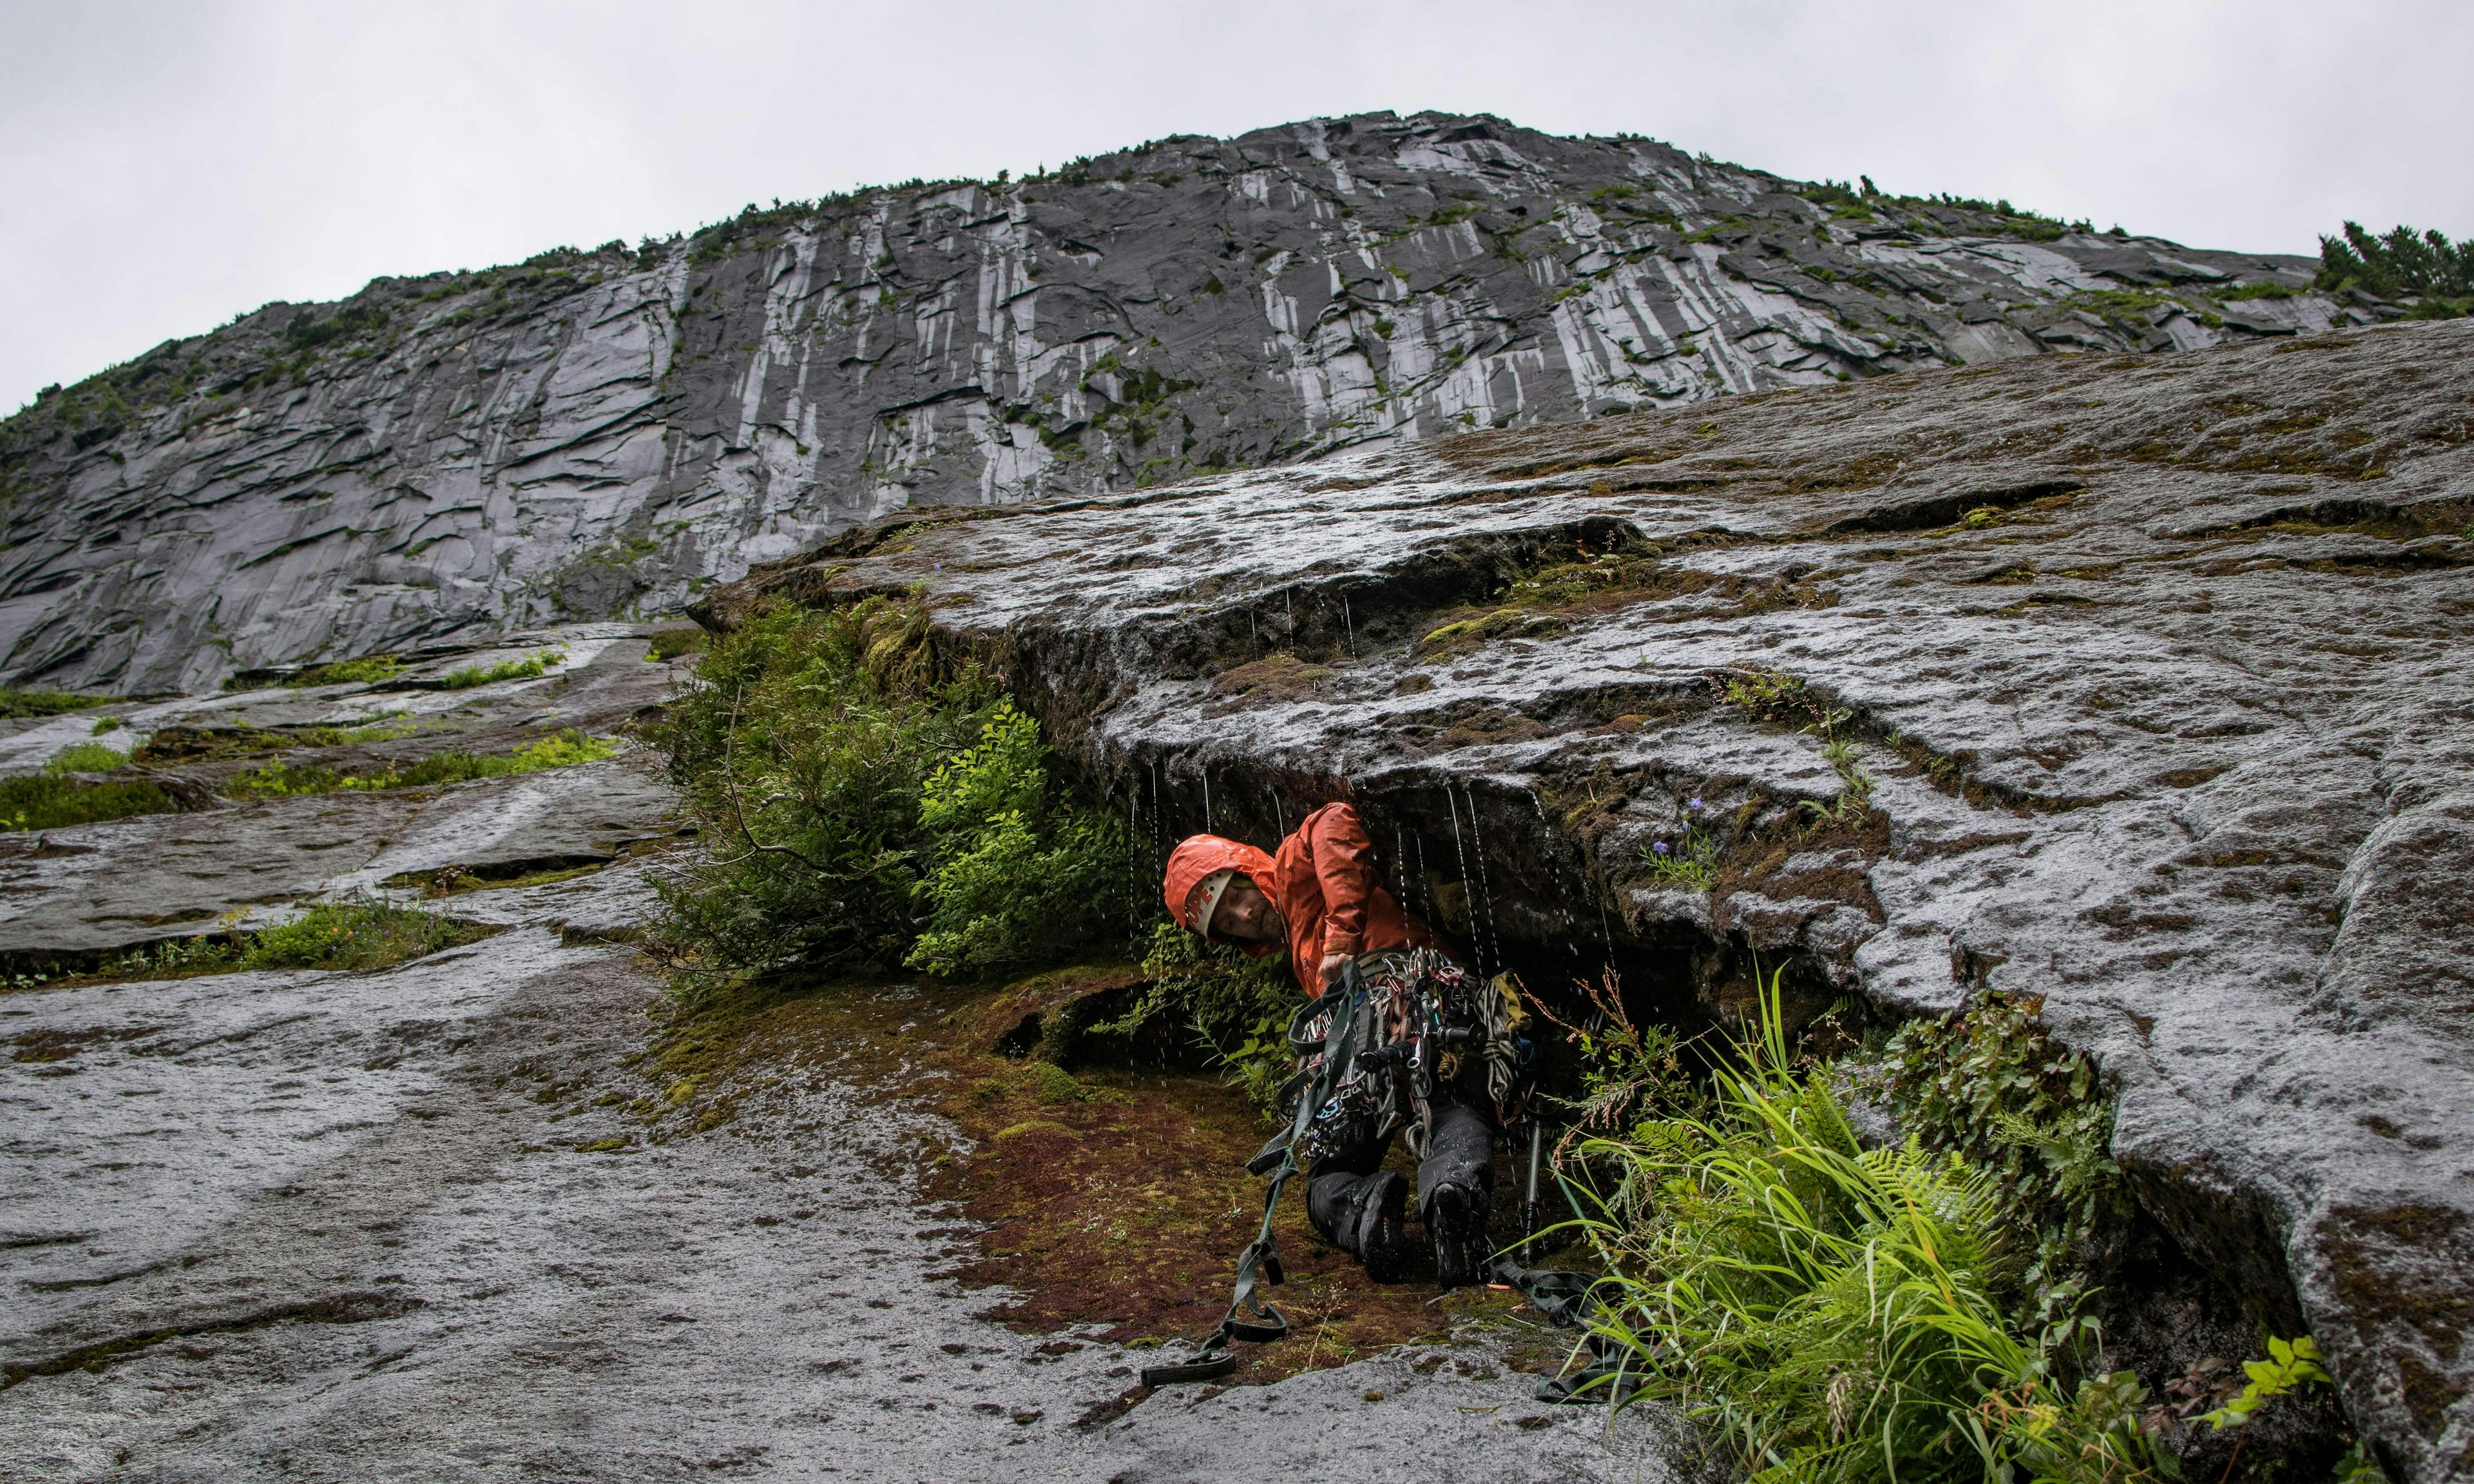 Climber leading route in a full deluge of rain